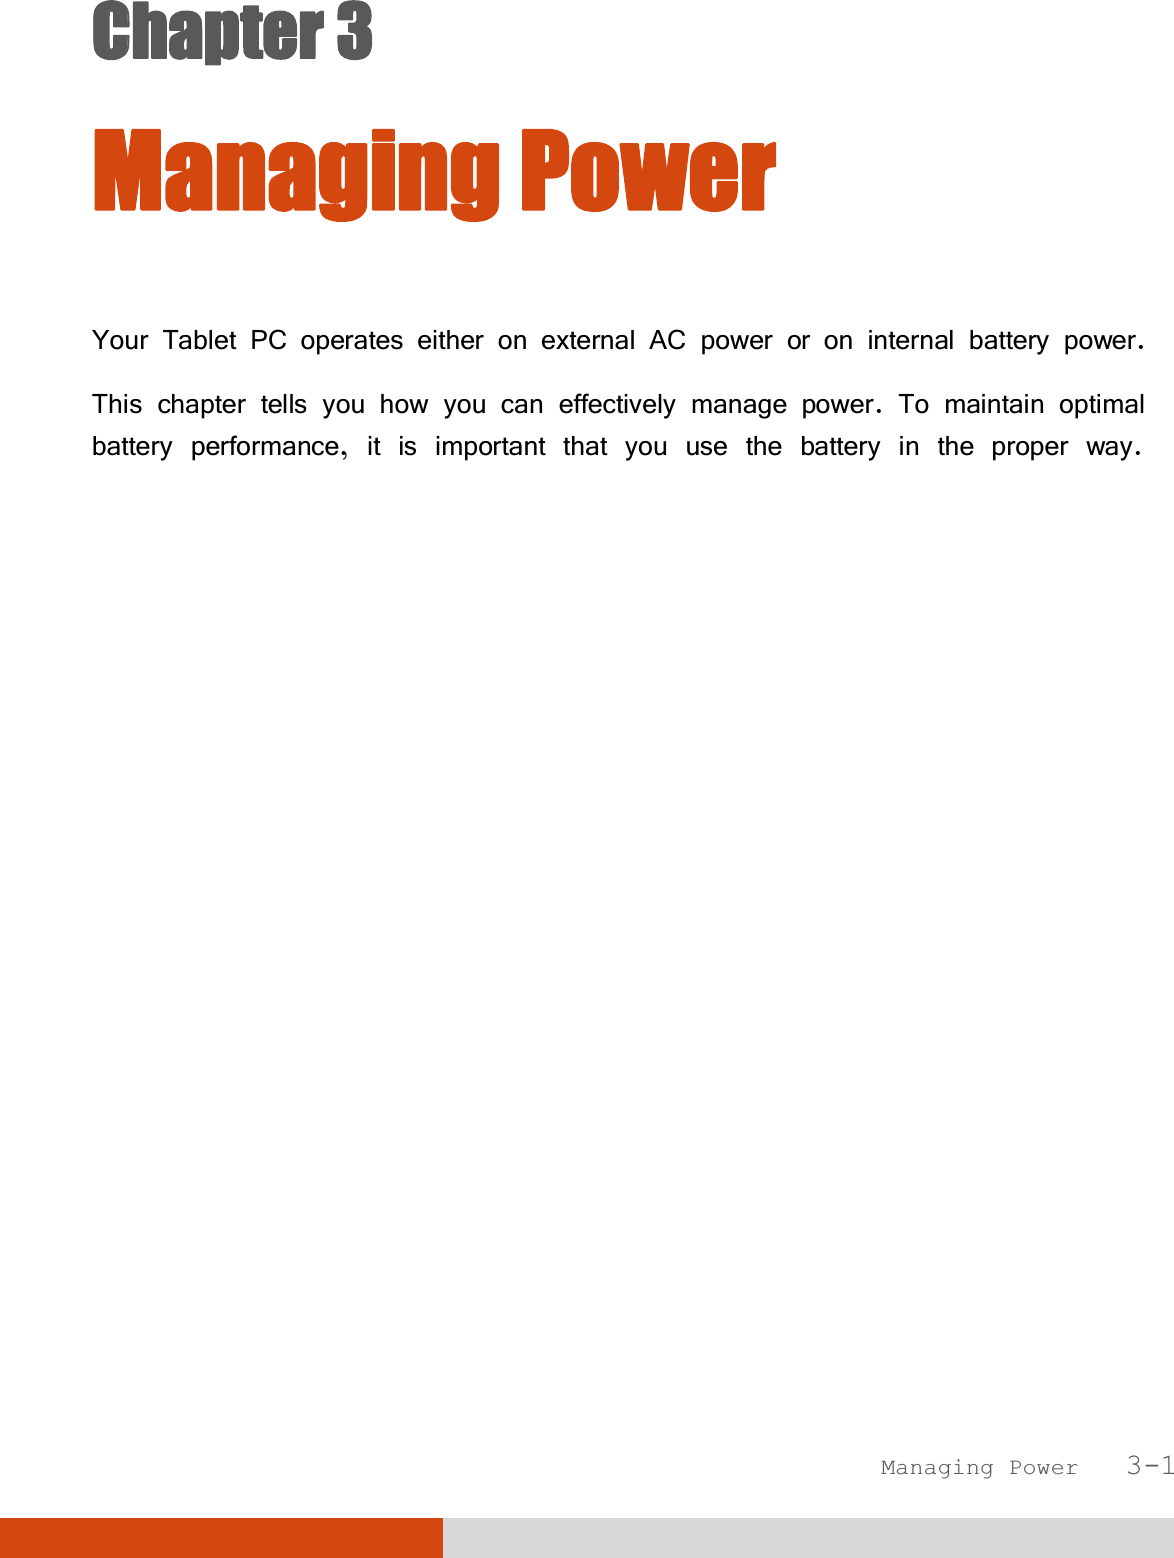  Managing Power   3-1 CChapter 3  Managing Power Your Tablet PC operates either on external AC power or on internal battery power. This chapter tells you how you can effectively manage power. To maintain optimal battery performance, it is important that you use the battery in the proper way. 